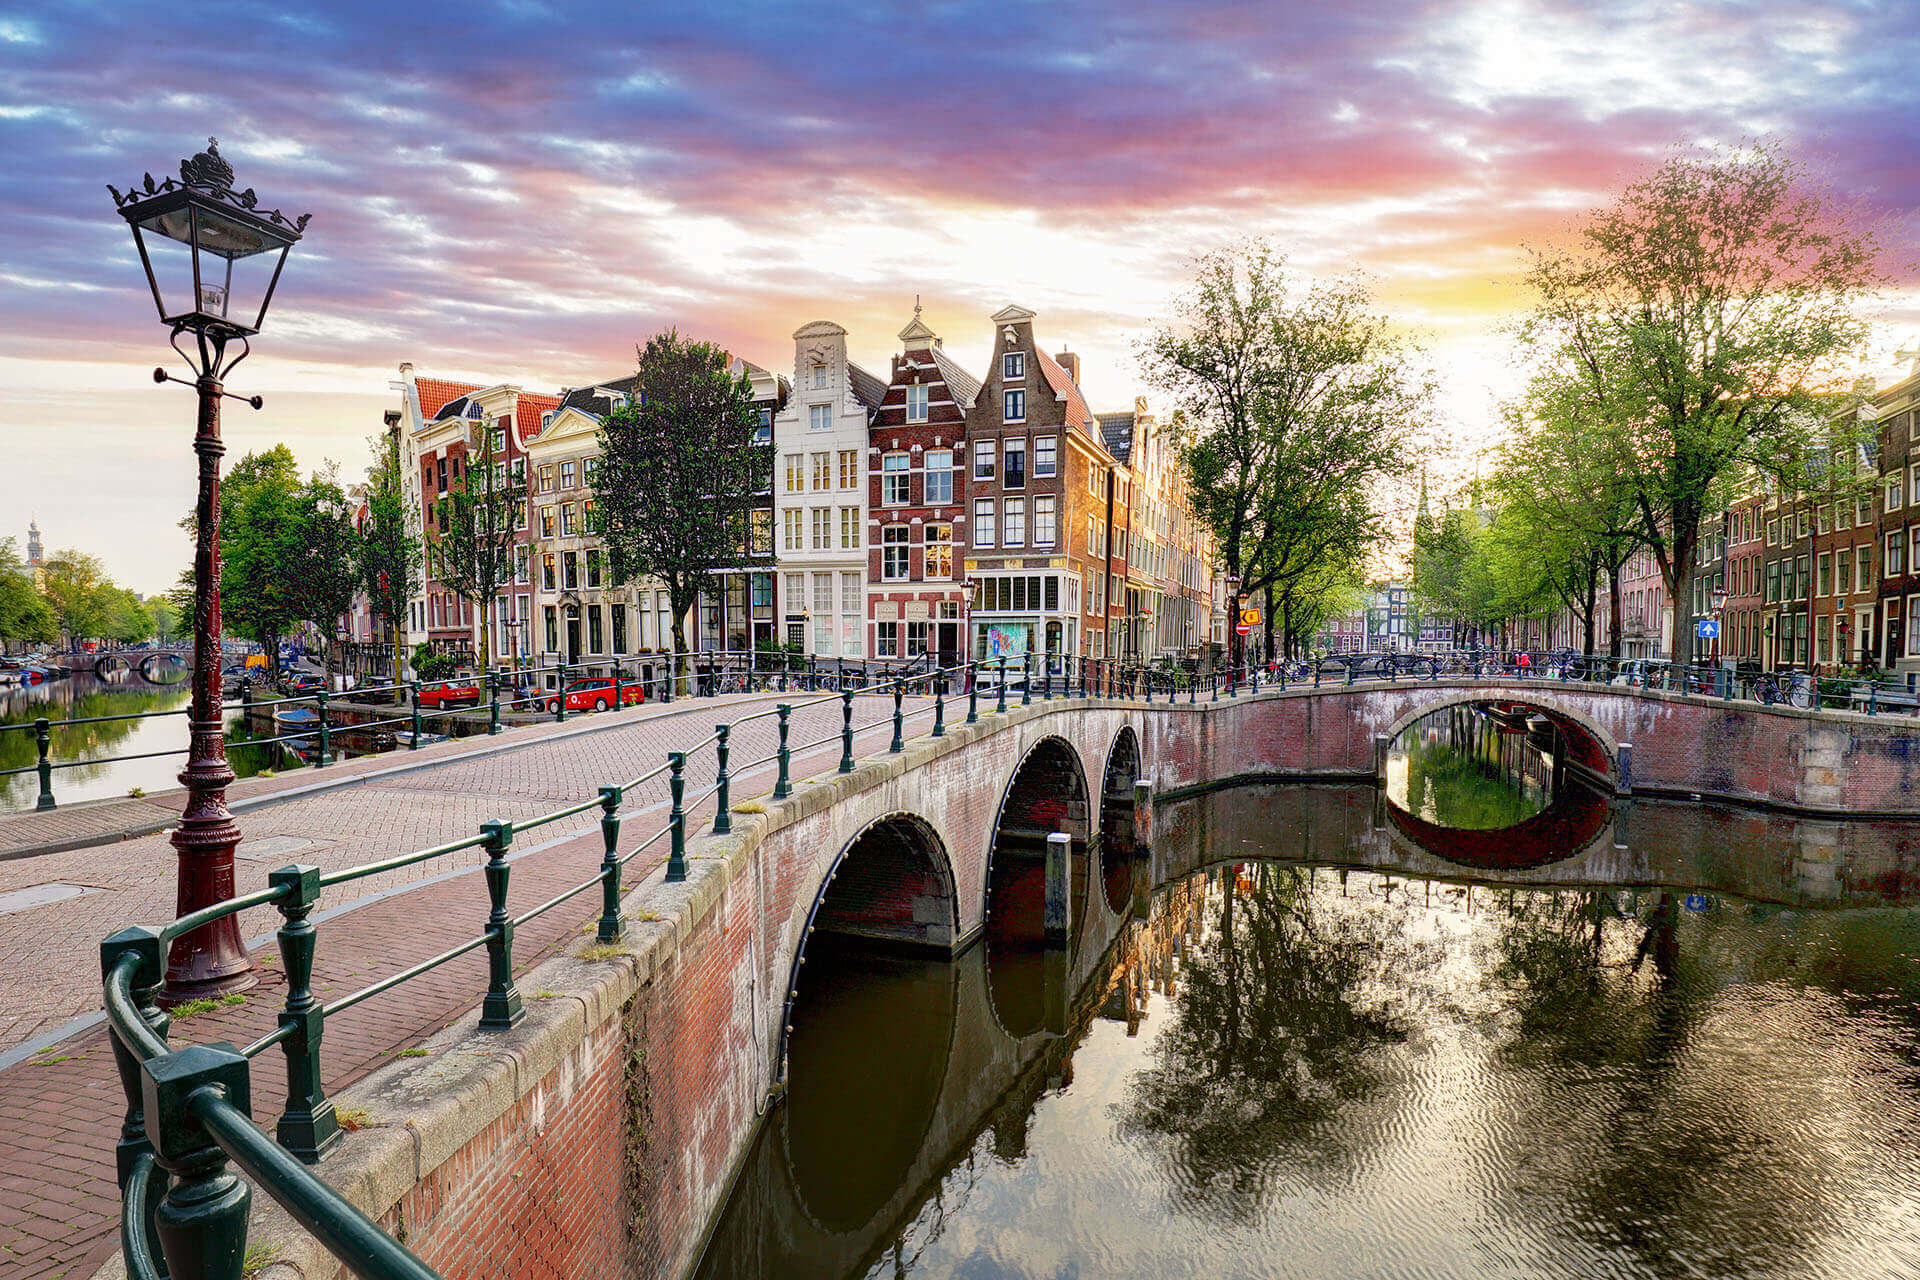 Netherlands: Minimum Salary Levels to Increase for Foreign Nationals